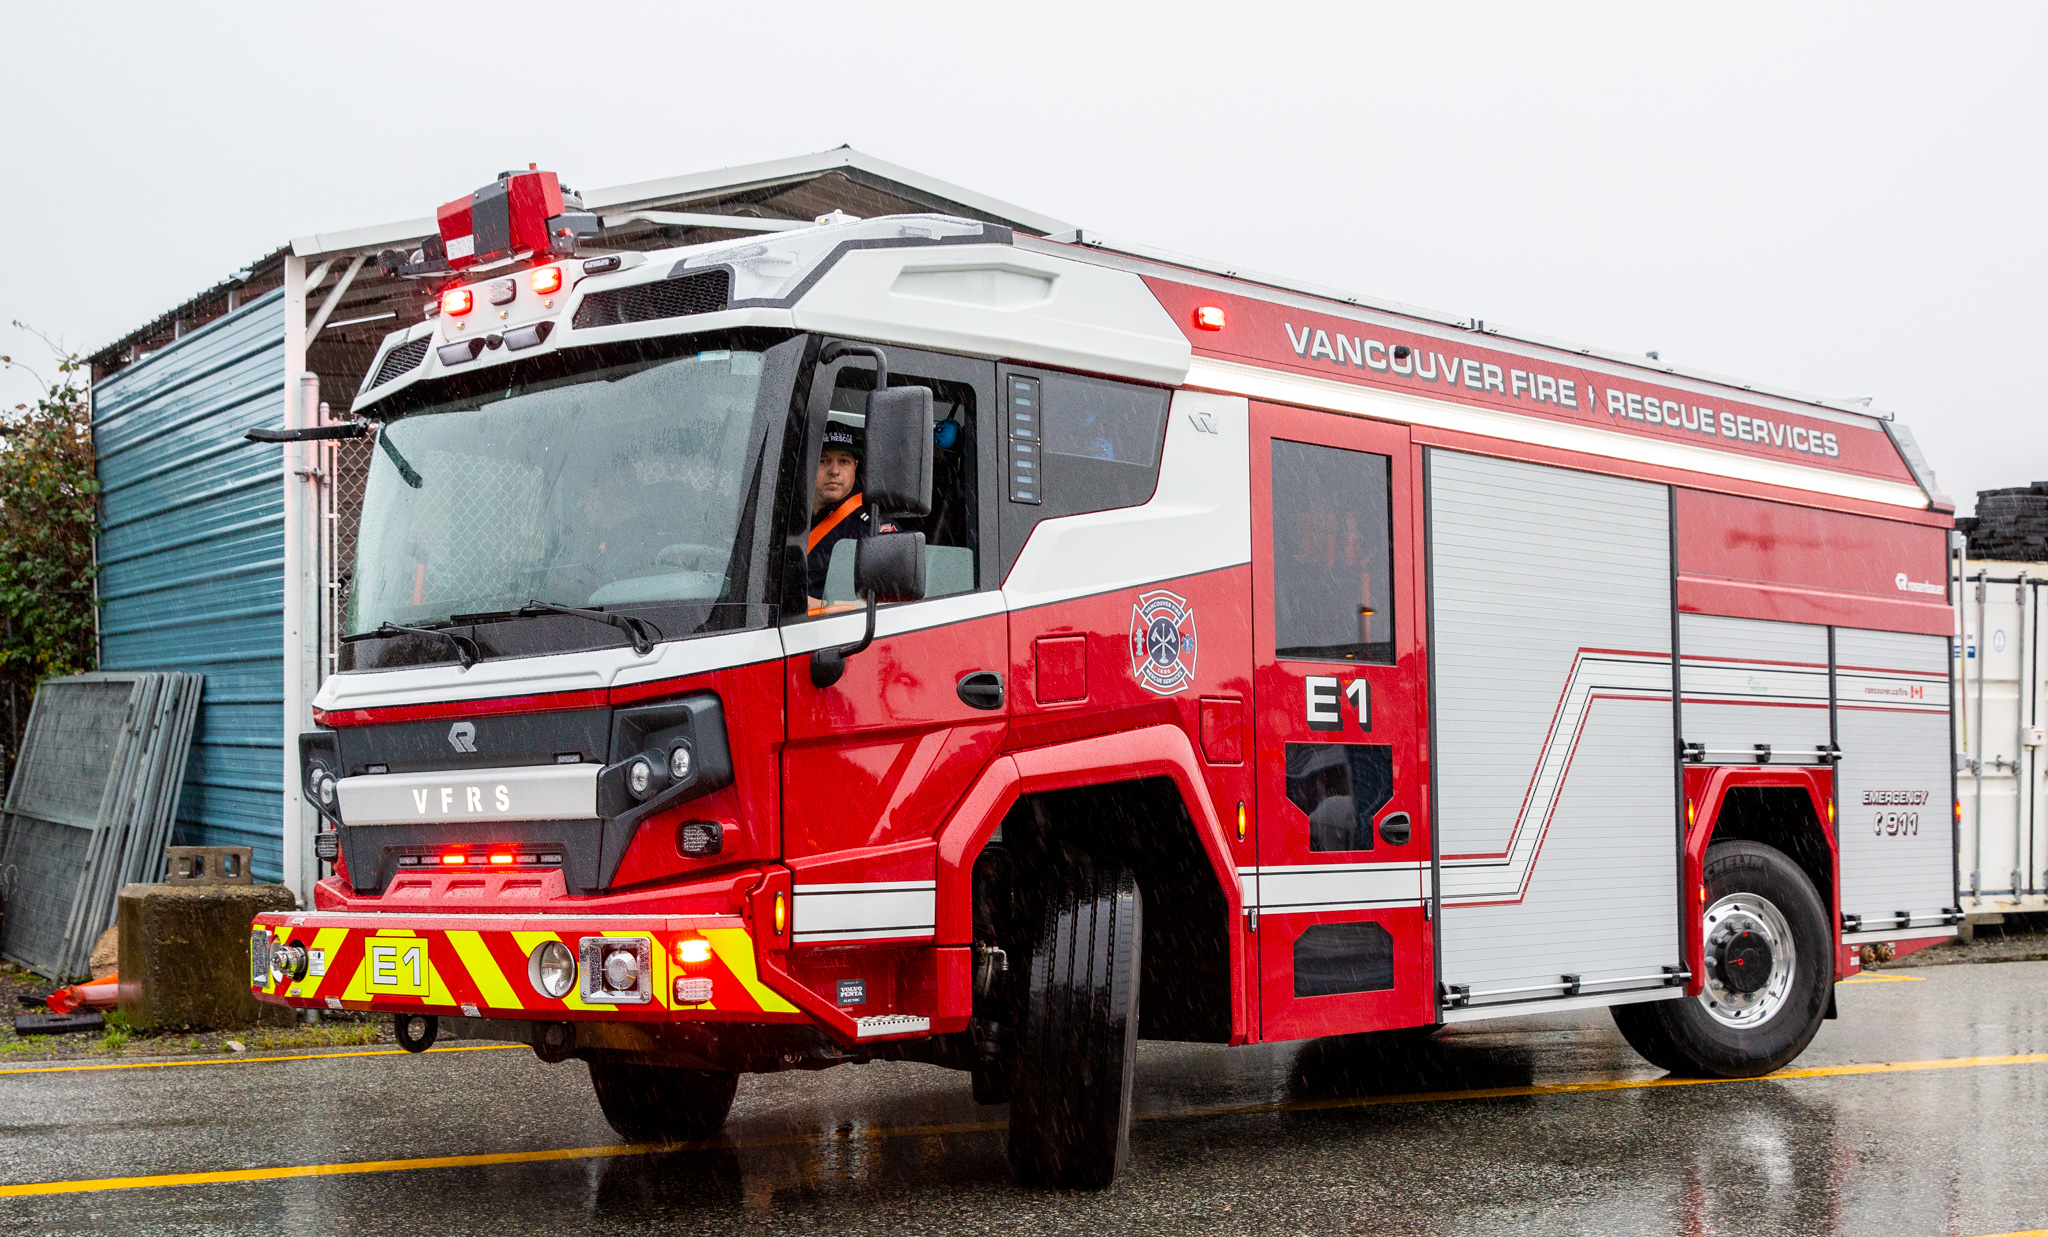 Vancouver unveils Canada's first electric fire truck - Vancouver